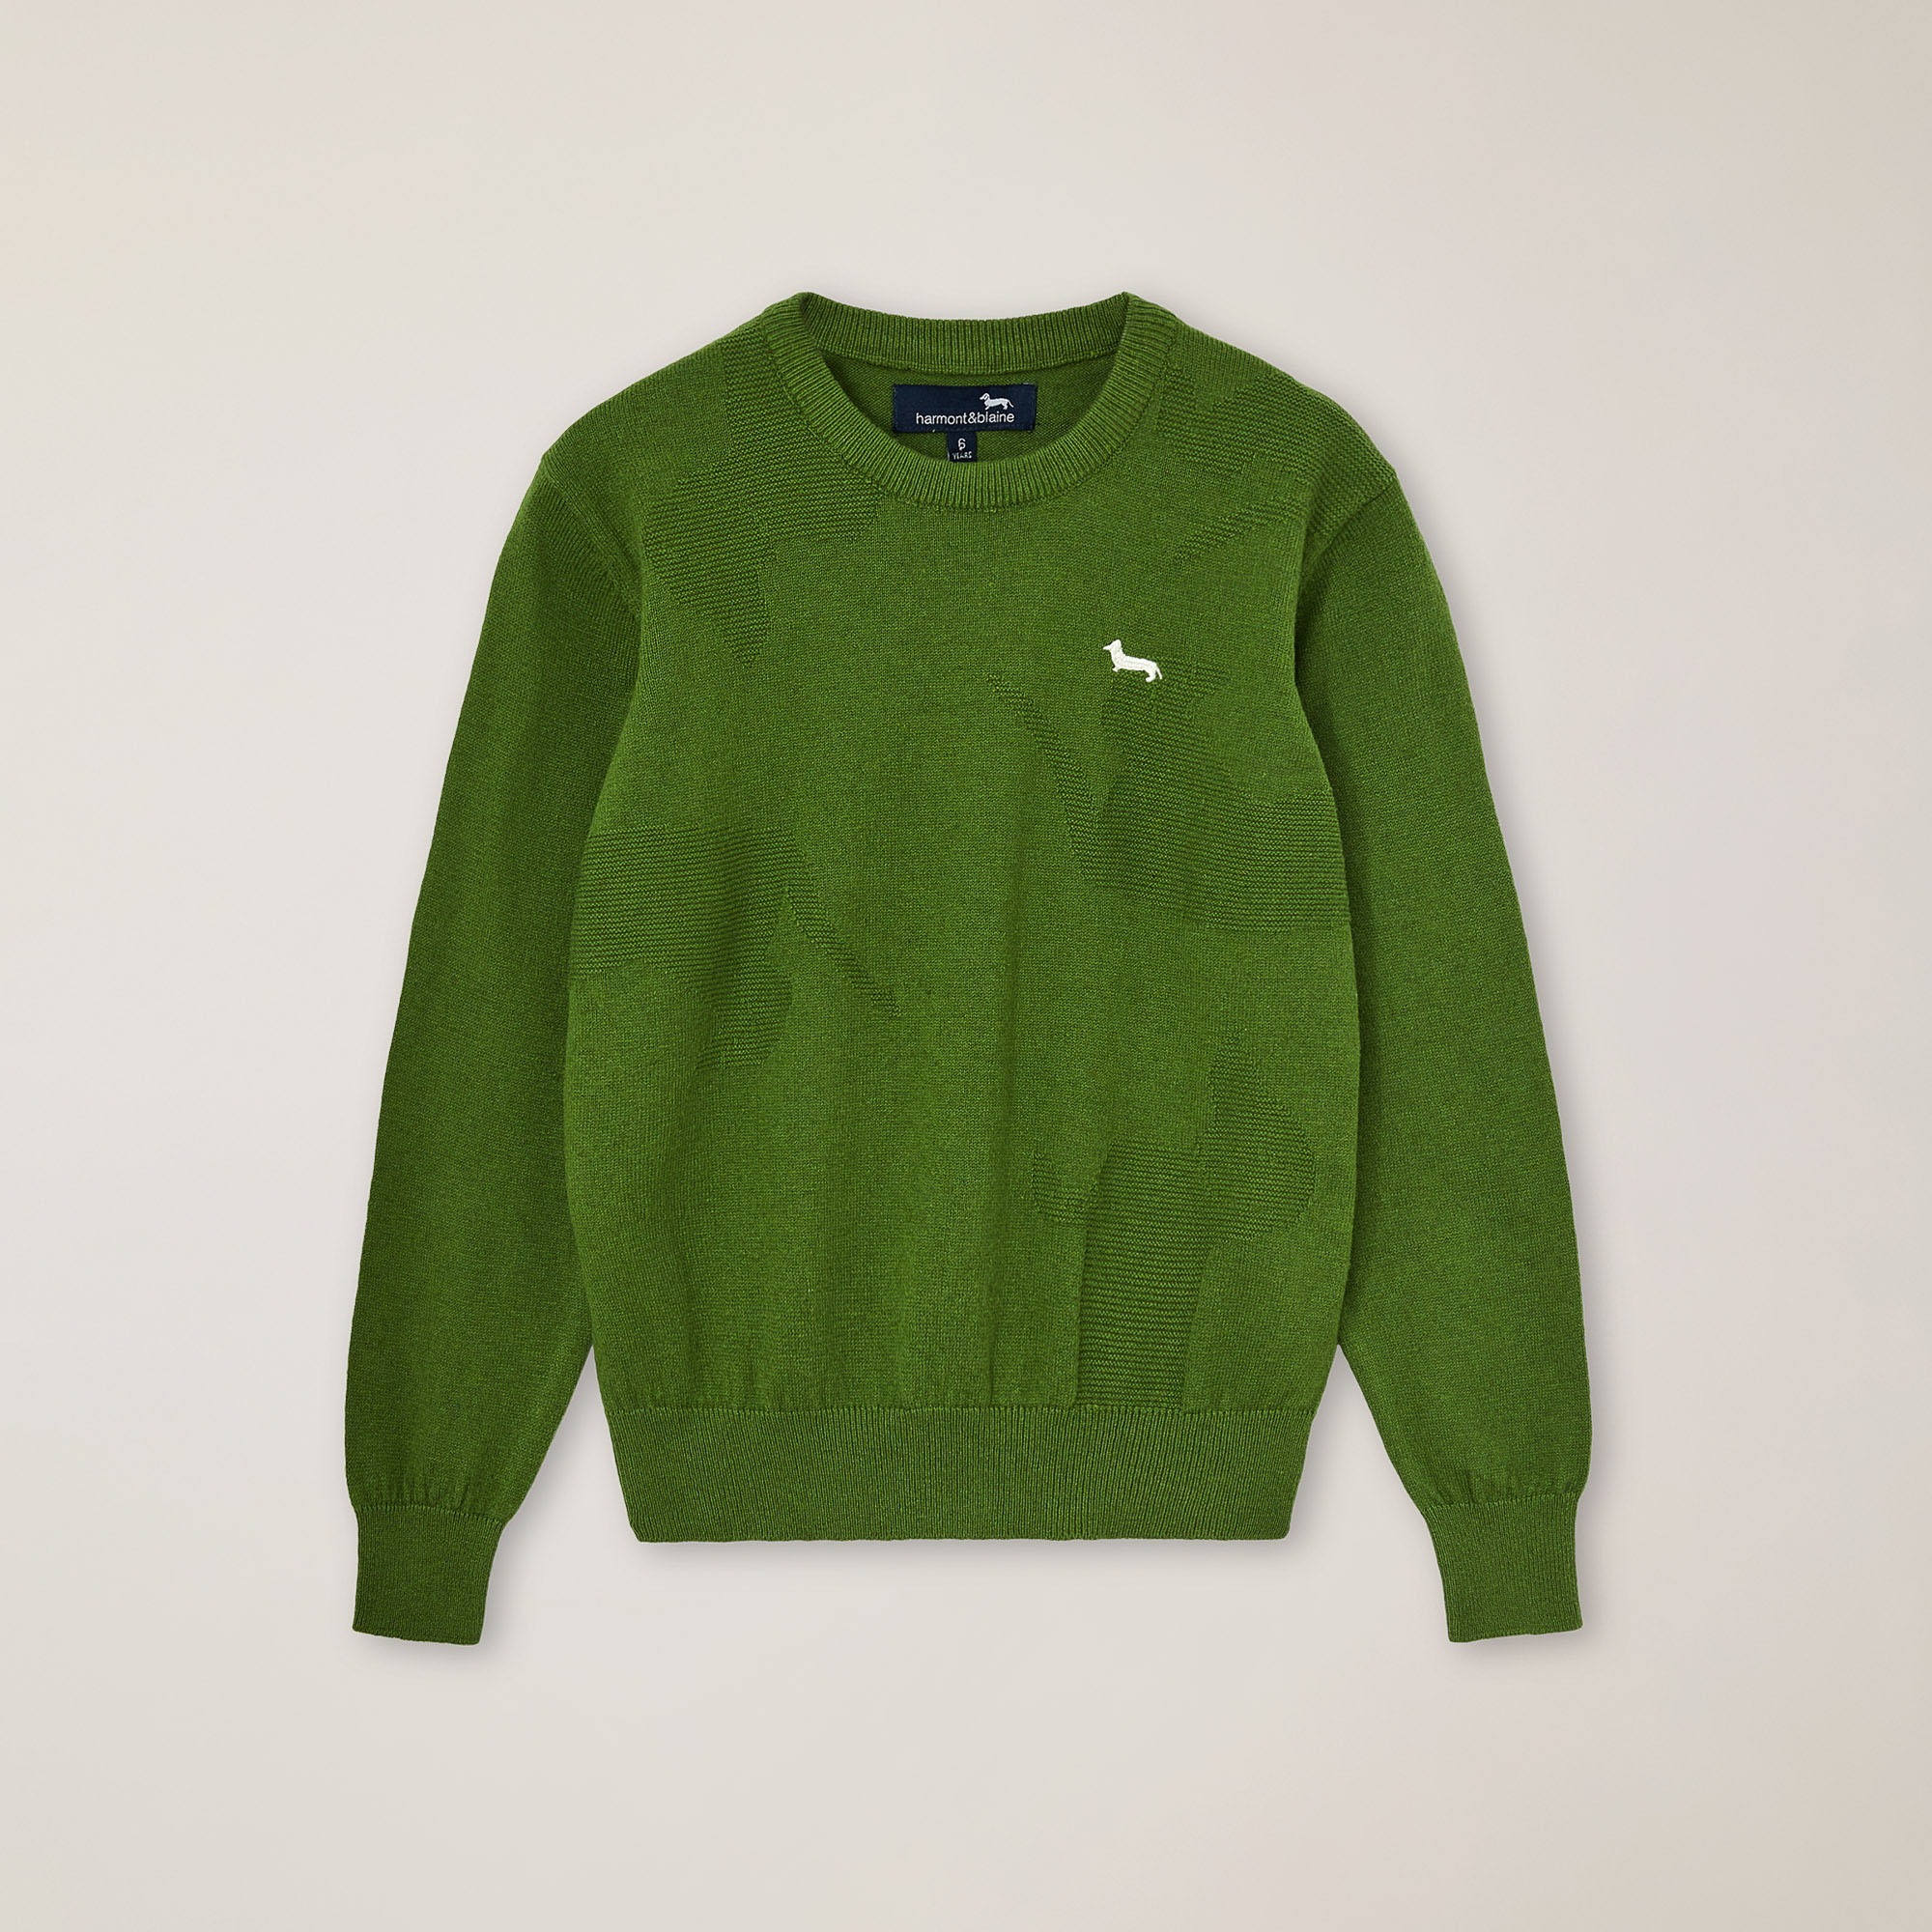 Jacquard crew neck with Dachshund embroidery, Acid green, large